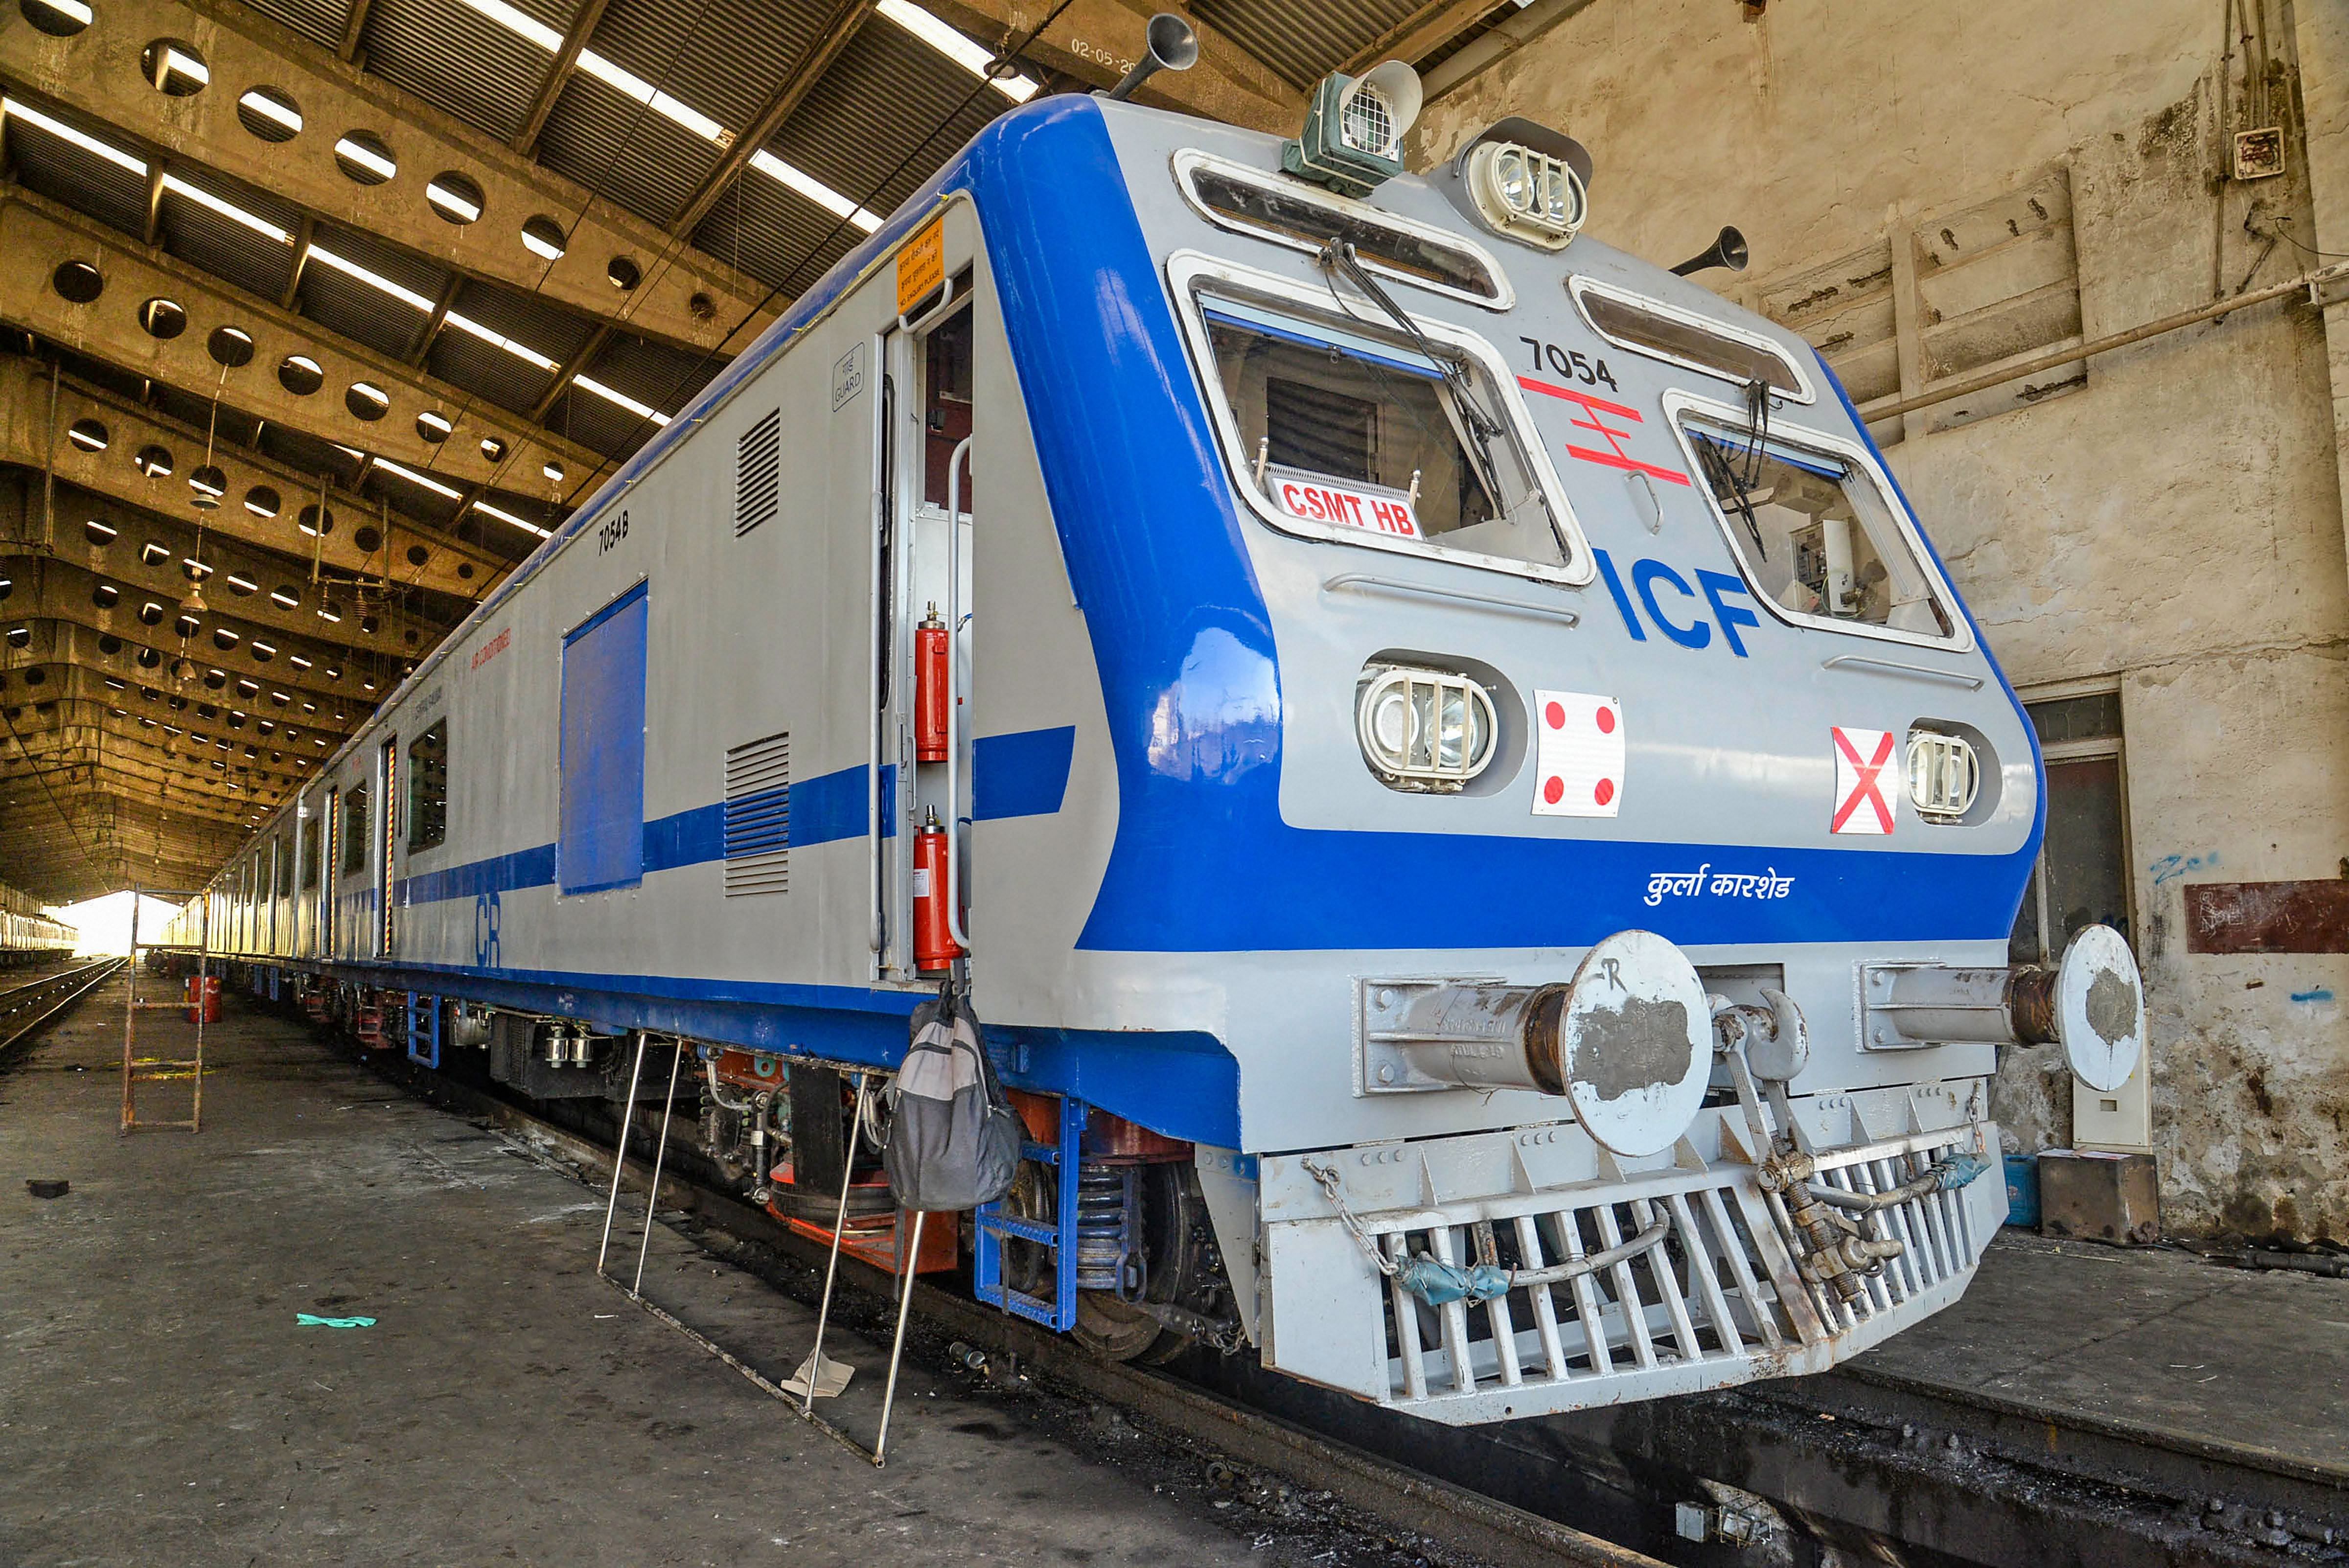 First AC train on Central Railway's trans-harbour corridor between Thane and Panvel is stationed at Sanpada car shed ahead of its trial run, in Navi Mumbai. (PTI Photo)